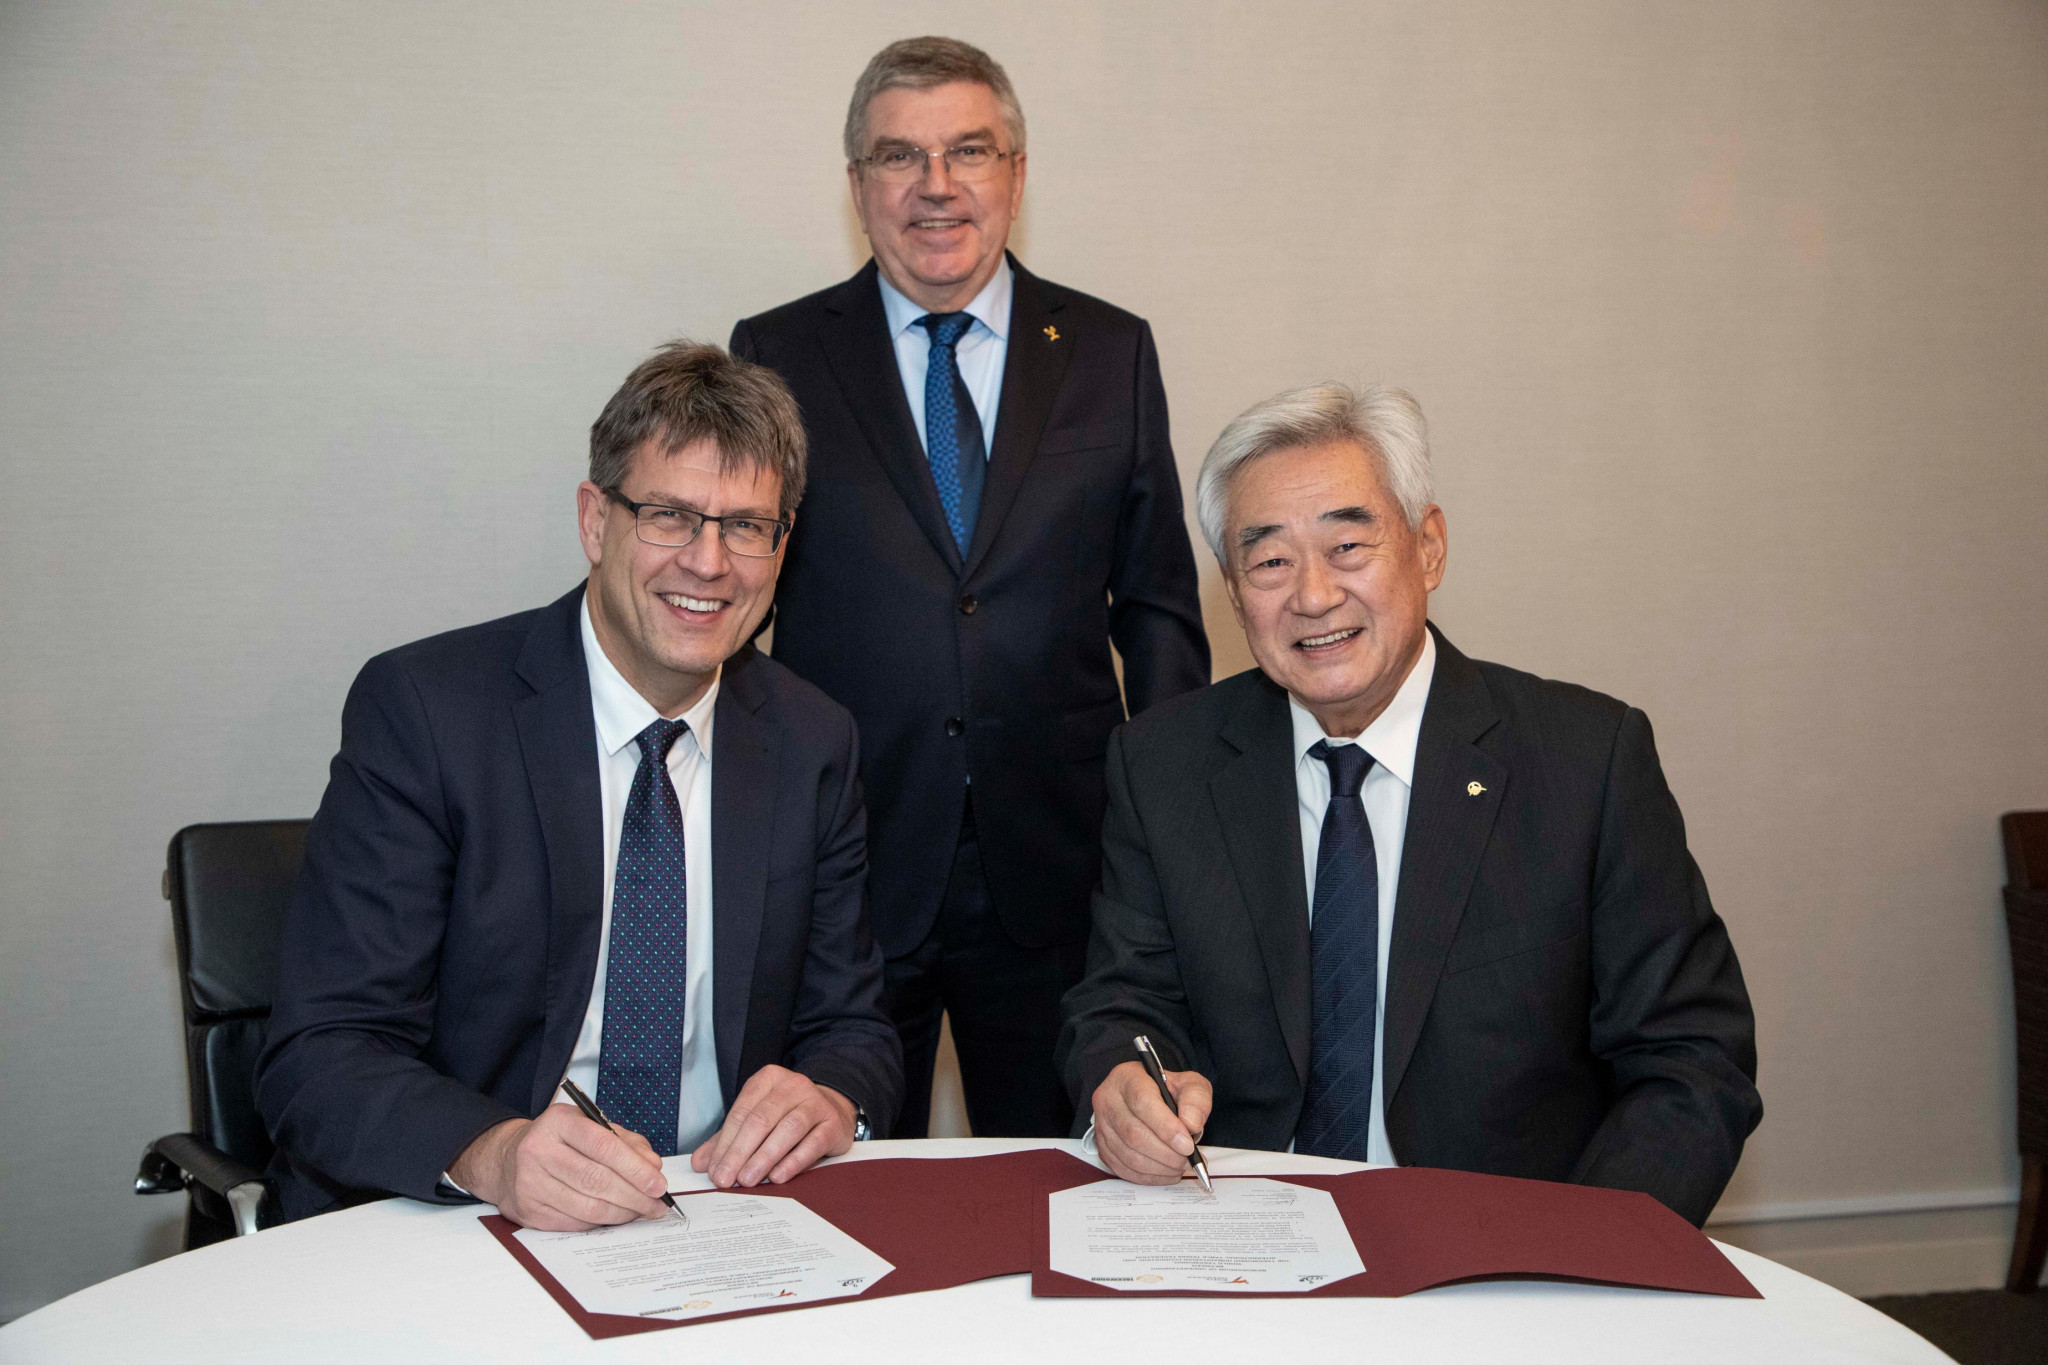 The Taekwondo Humanitarian Foundation and International Table Tennis Federation have agreed to work together to promote peace through sport ©World Taekwondo